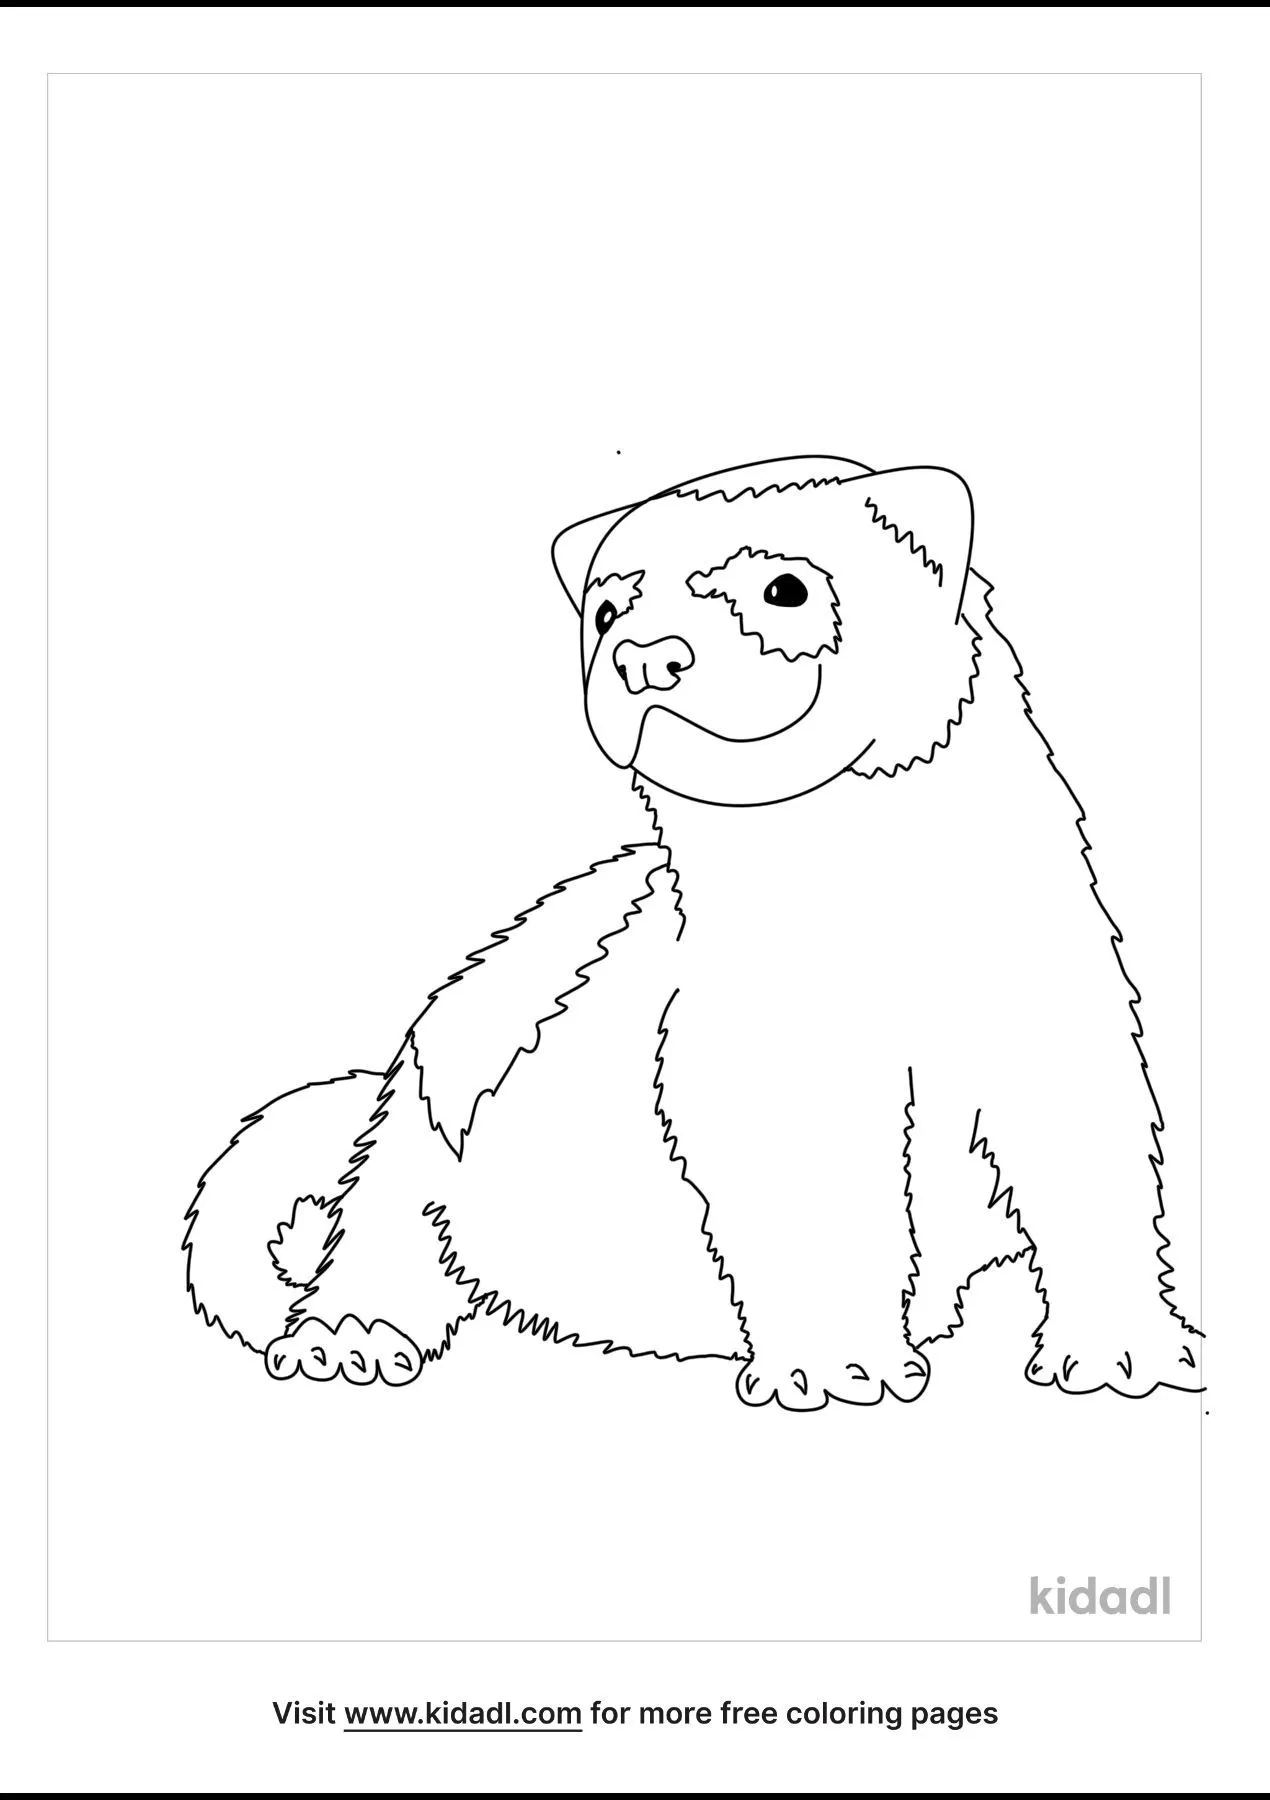 Ferret Coloring Pages Free Animals Coloring Pages Kidadl